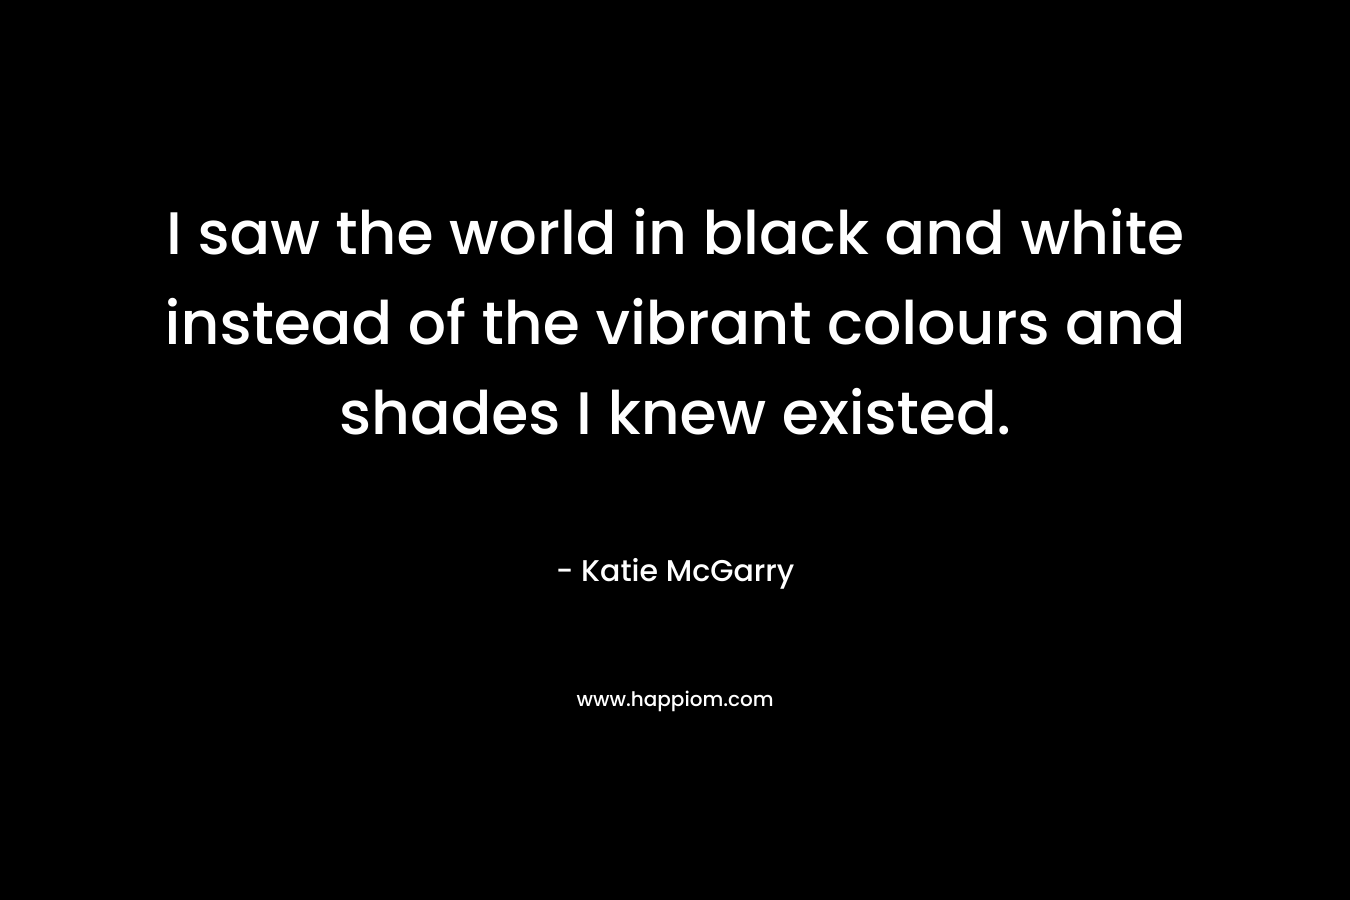 I saw the world in black and white instead of the vibrant colours and shades I knew existed.